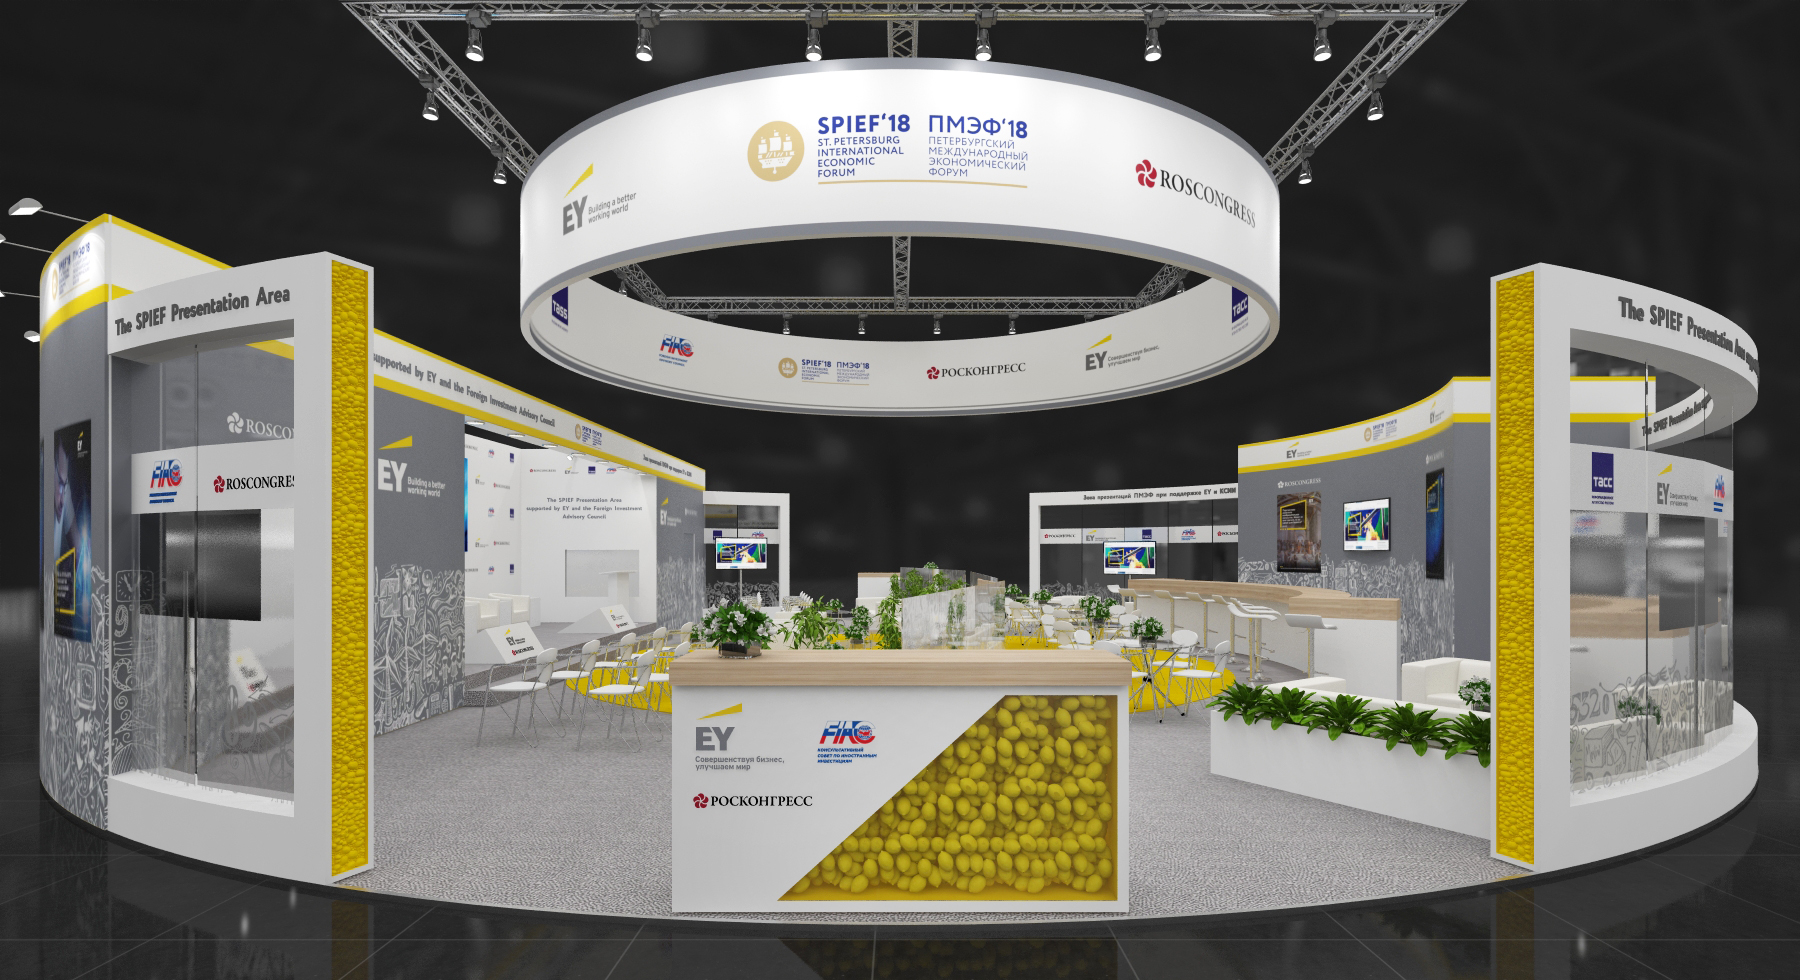 SPIEF Presentation Area supported EY and FIAC to Operate During the Forum